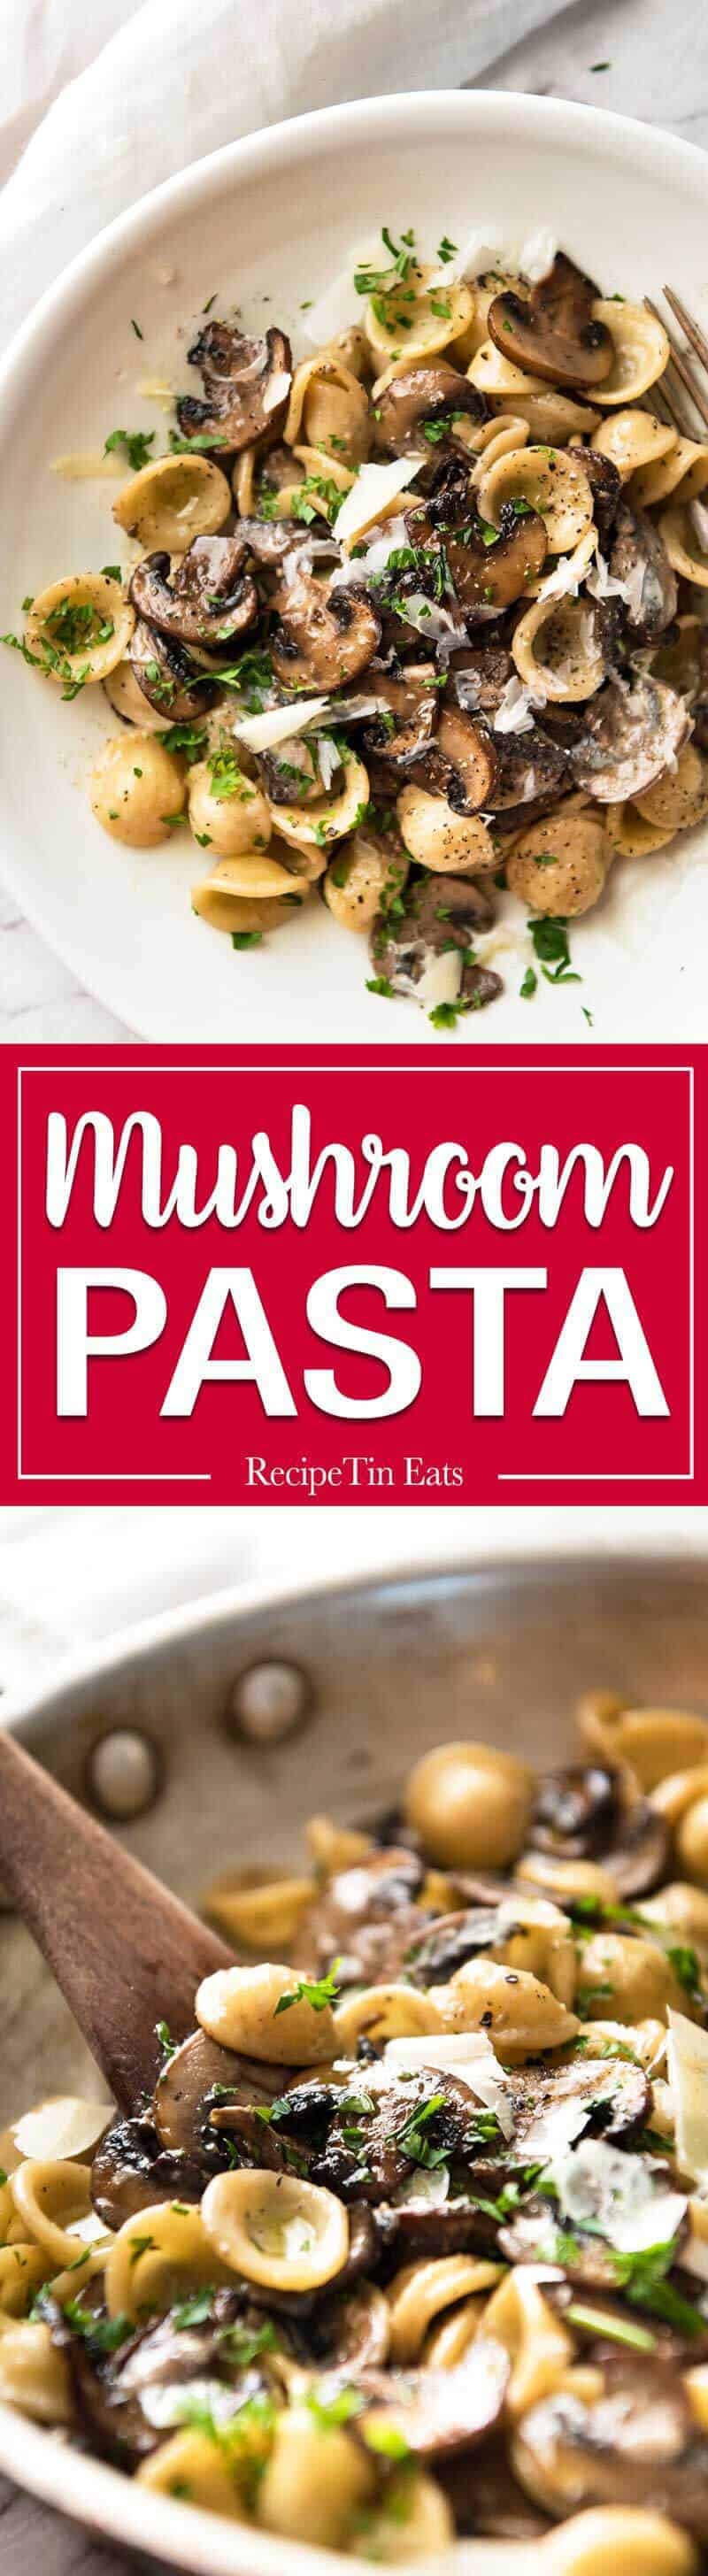 A spectacular way to use up mushrooms - in this flavorful and juicy mushroom pasta made the classic Italian way.  15 minute dinner!  www.recipetineats.com